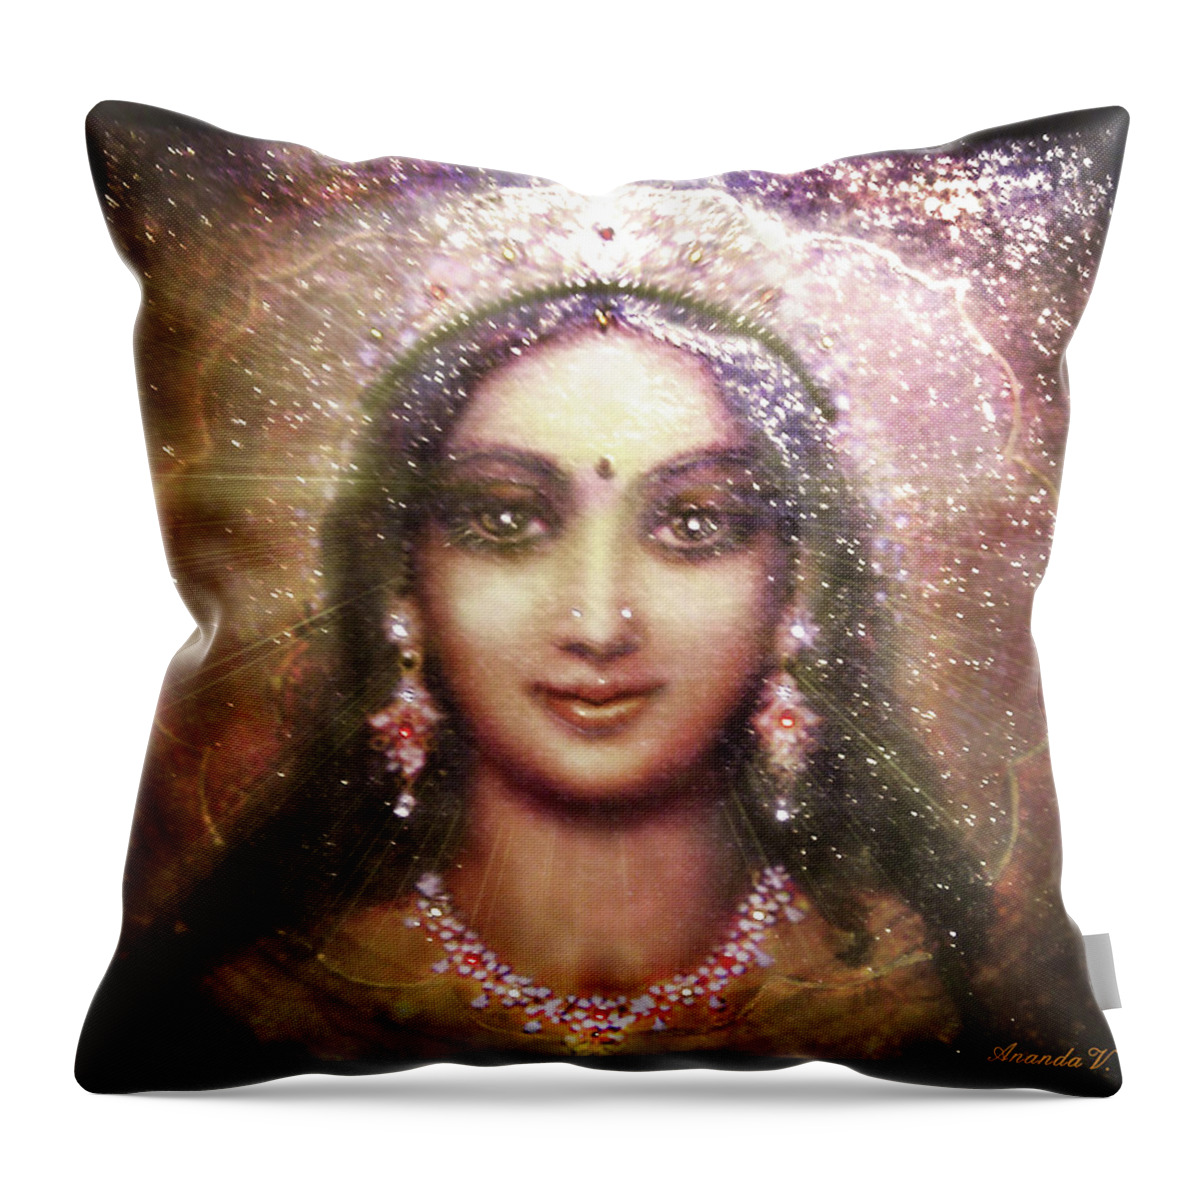 Goddess Painting Throw Pillow featuring the mixed media Vision of the Goddess - Durga or Shakti by Ananda Vdovic